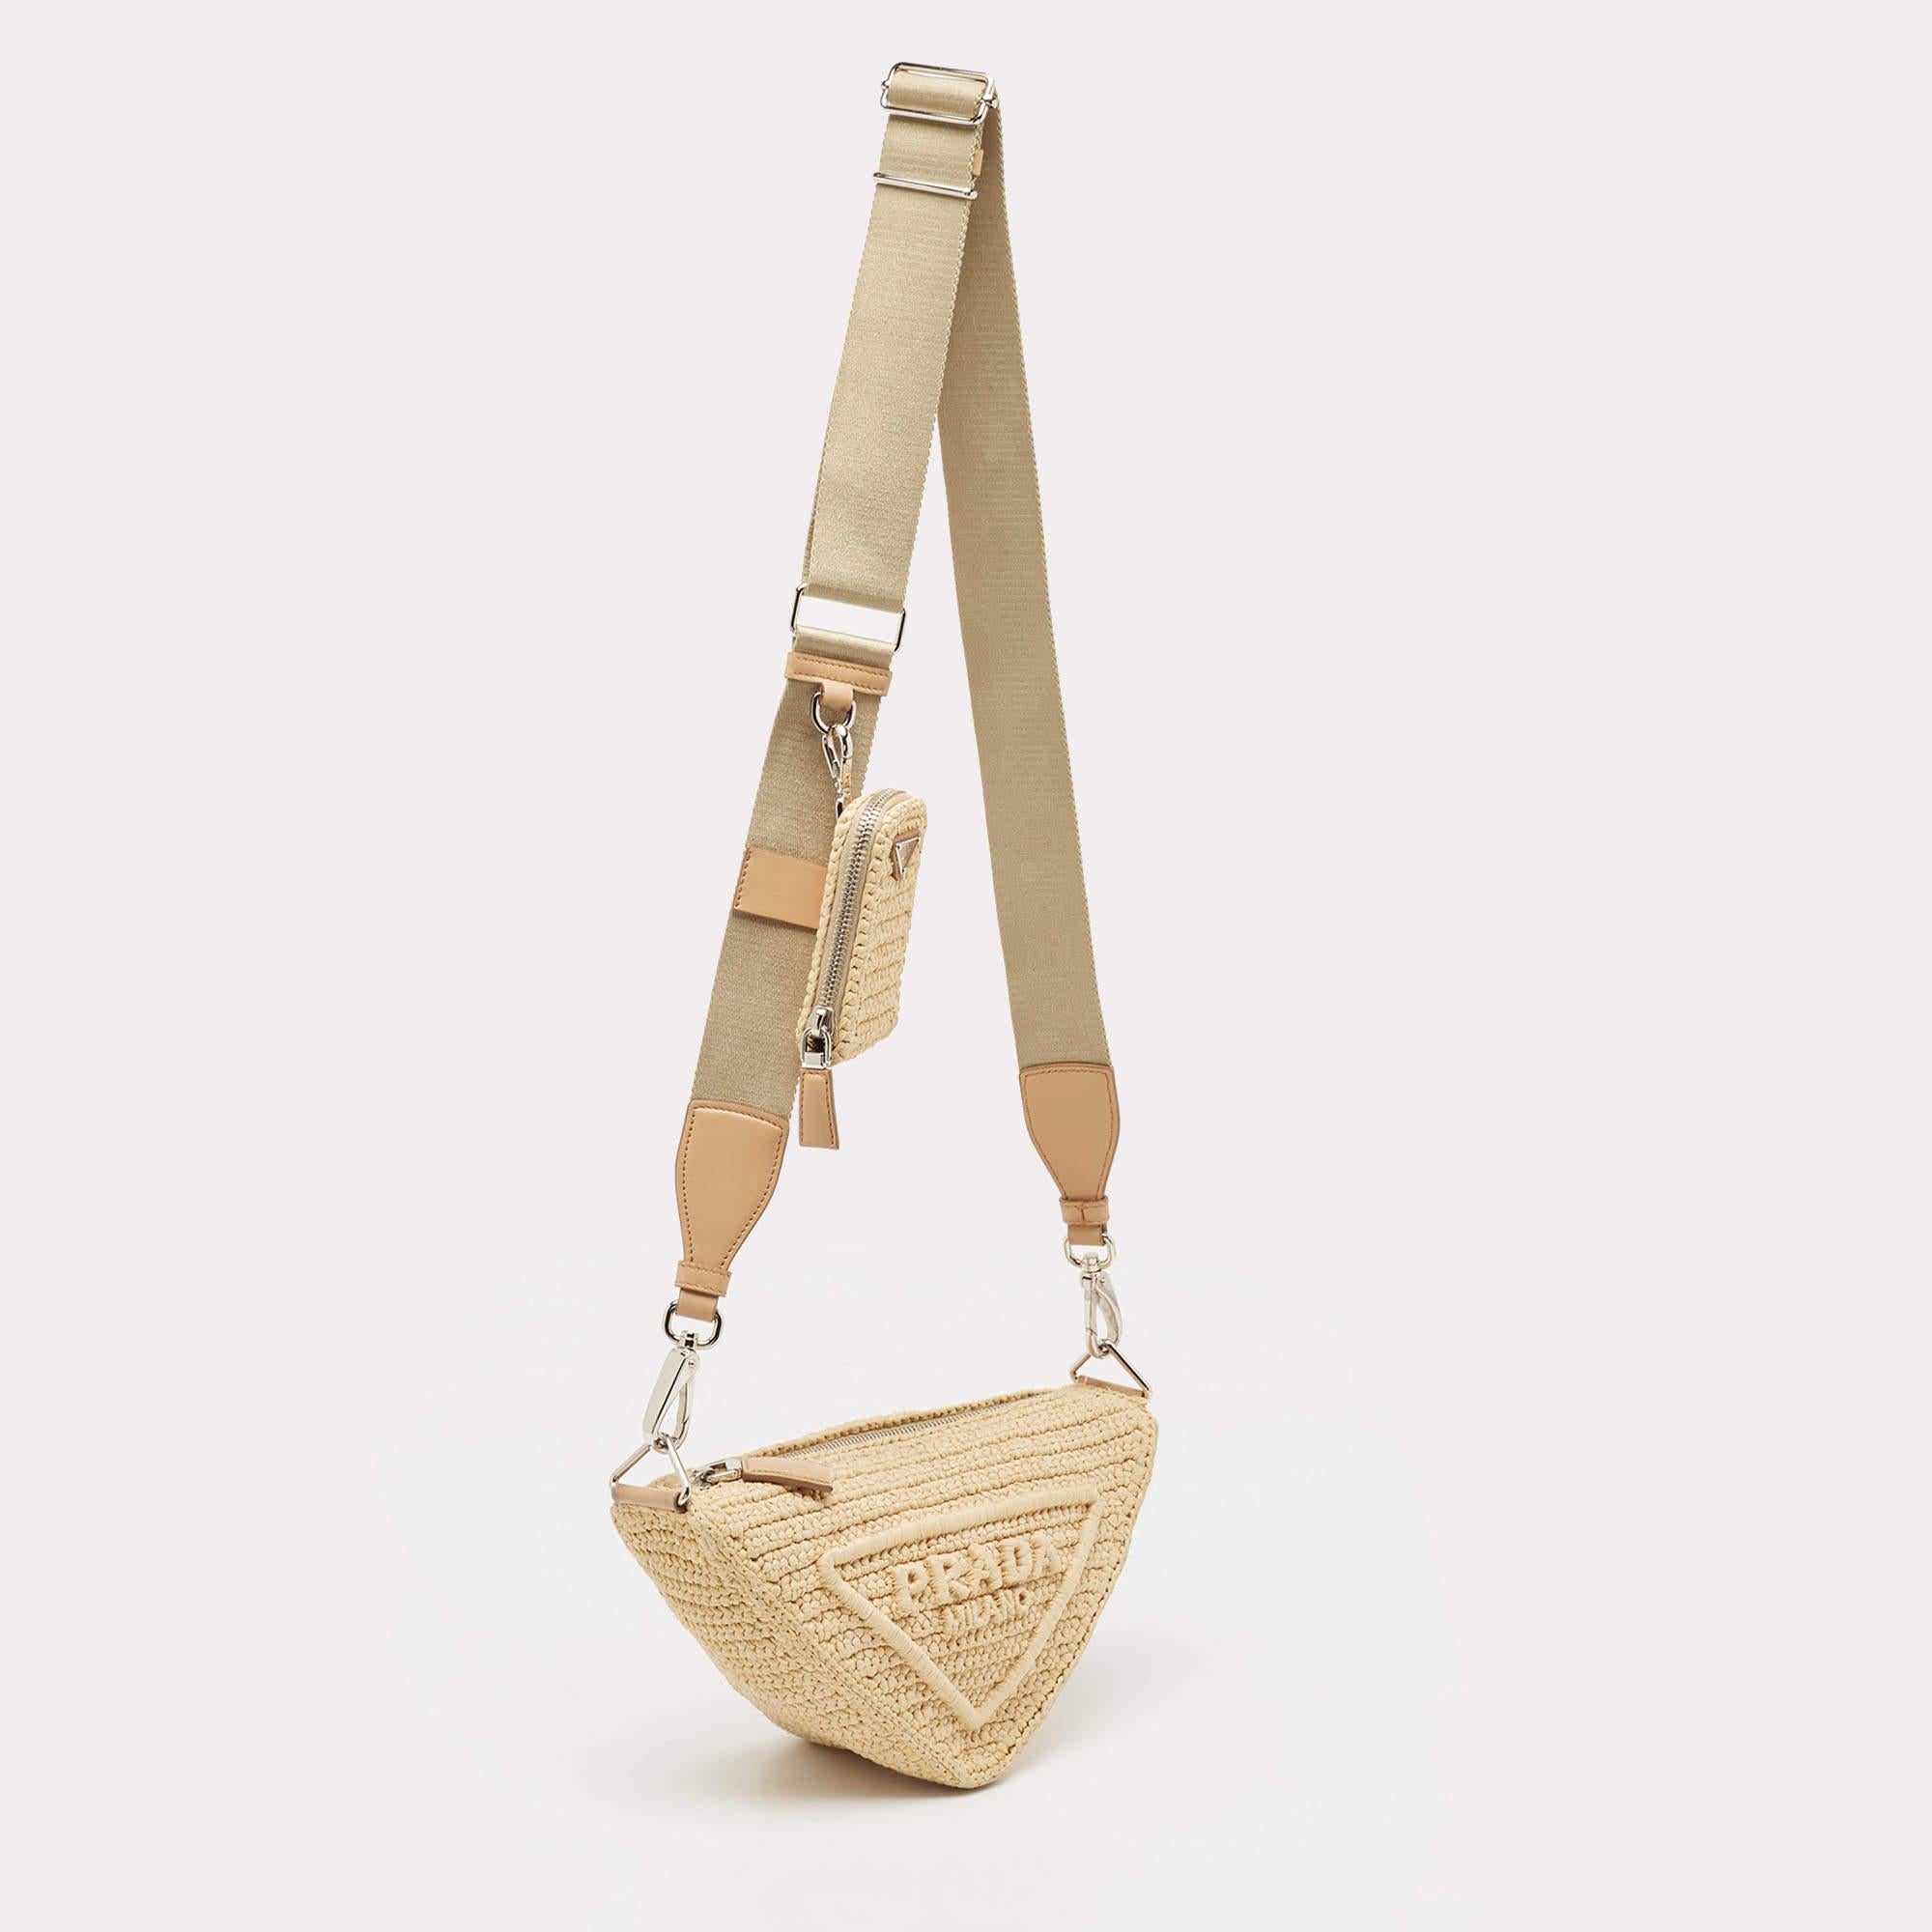 The Prada shoulder bag exudes effortless elegance with its intricate crochet design in earthy tones. Crafted with precision, its triangular silhouette adds a modern twist to a classic style. Perfect for summer outings or adding a touch of